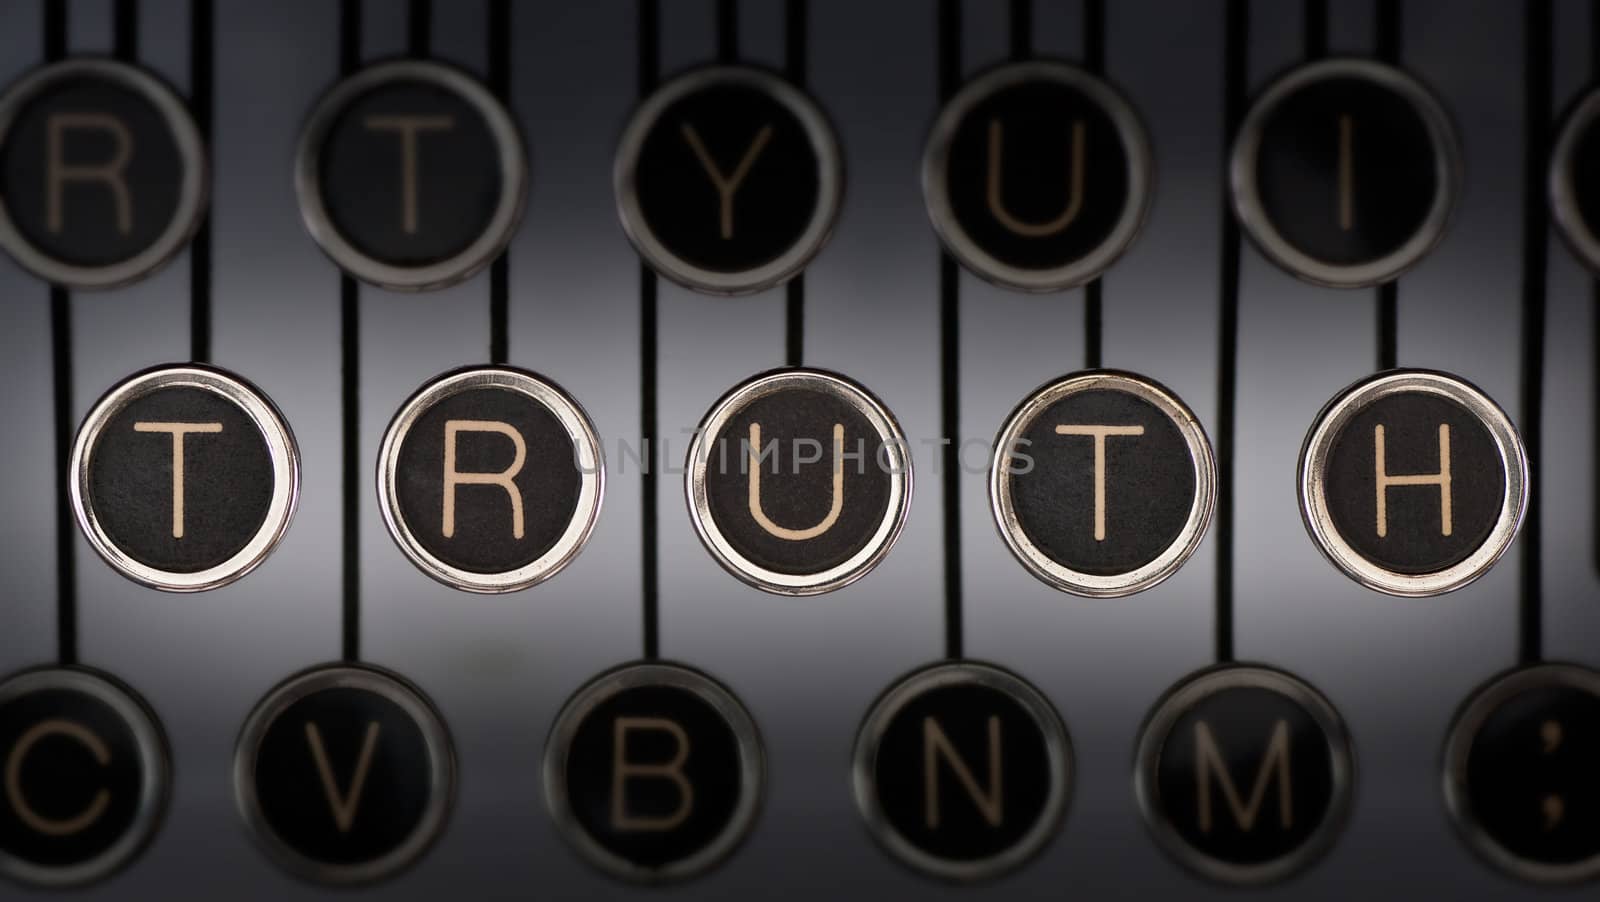 Image of old typewriter keyboard with scratched chrome keys that spell out the word "TRUTH". Lighting and focus are centered on "TRUTH".